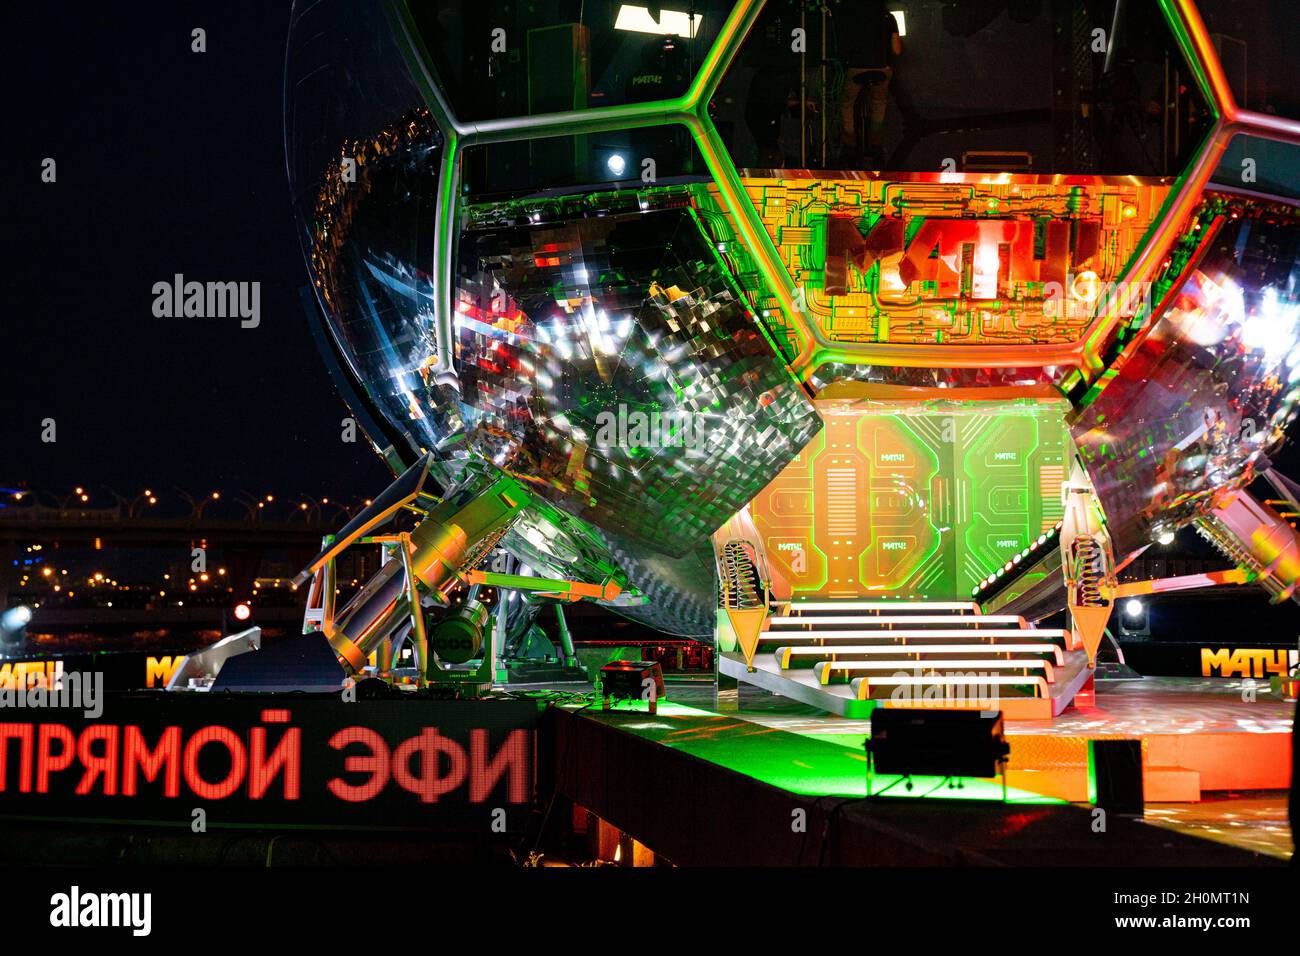 EURO 2020 Match TV channel studio construction like a football near Gazprom  arena, night broadcast during the UEFA tournament, St Petersburg Russia  Stock Photo - Alamy